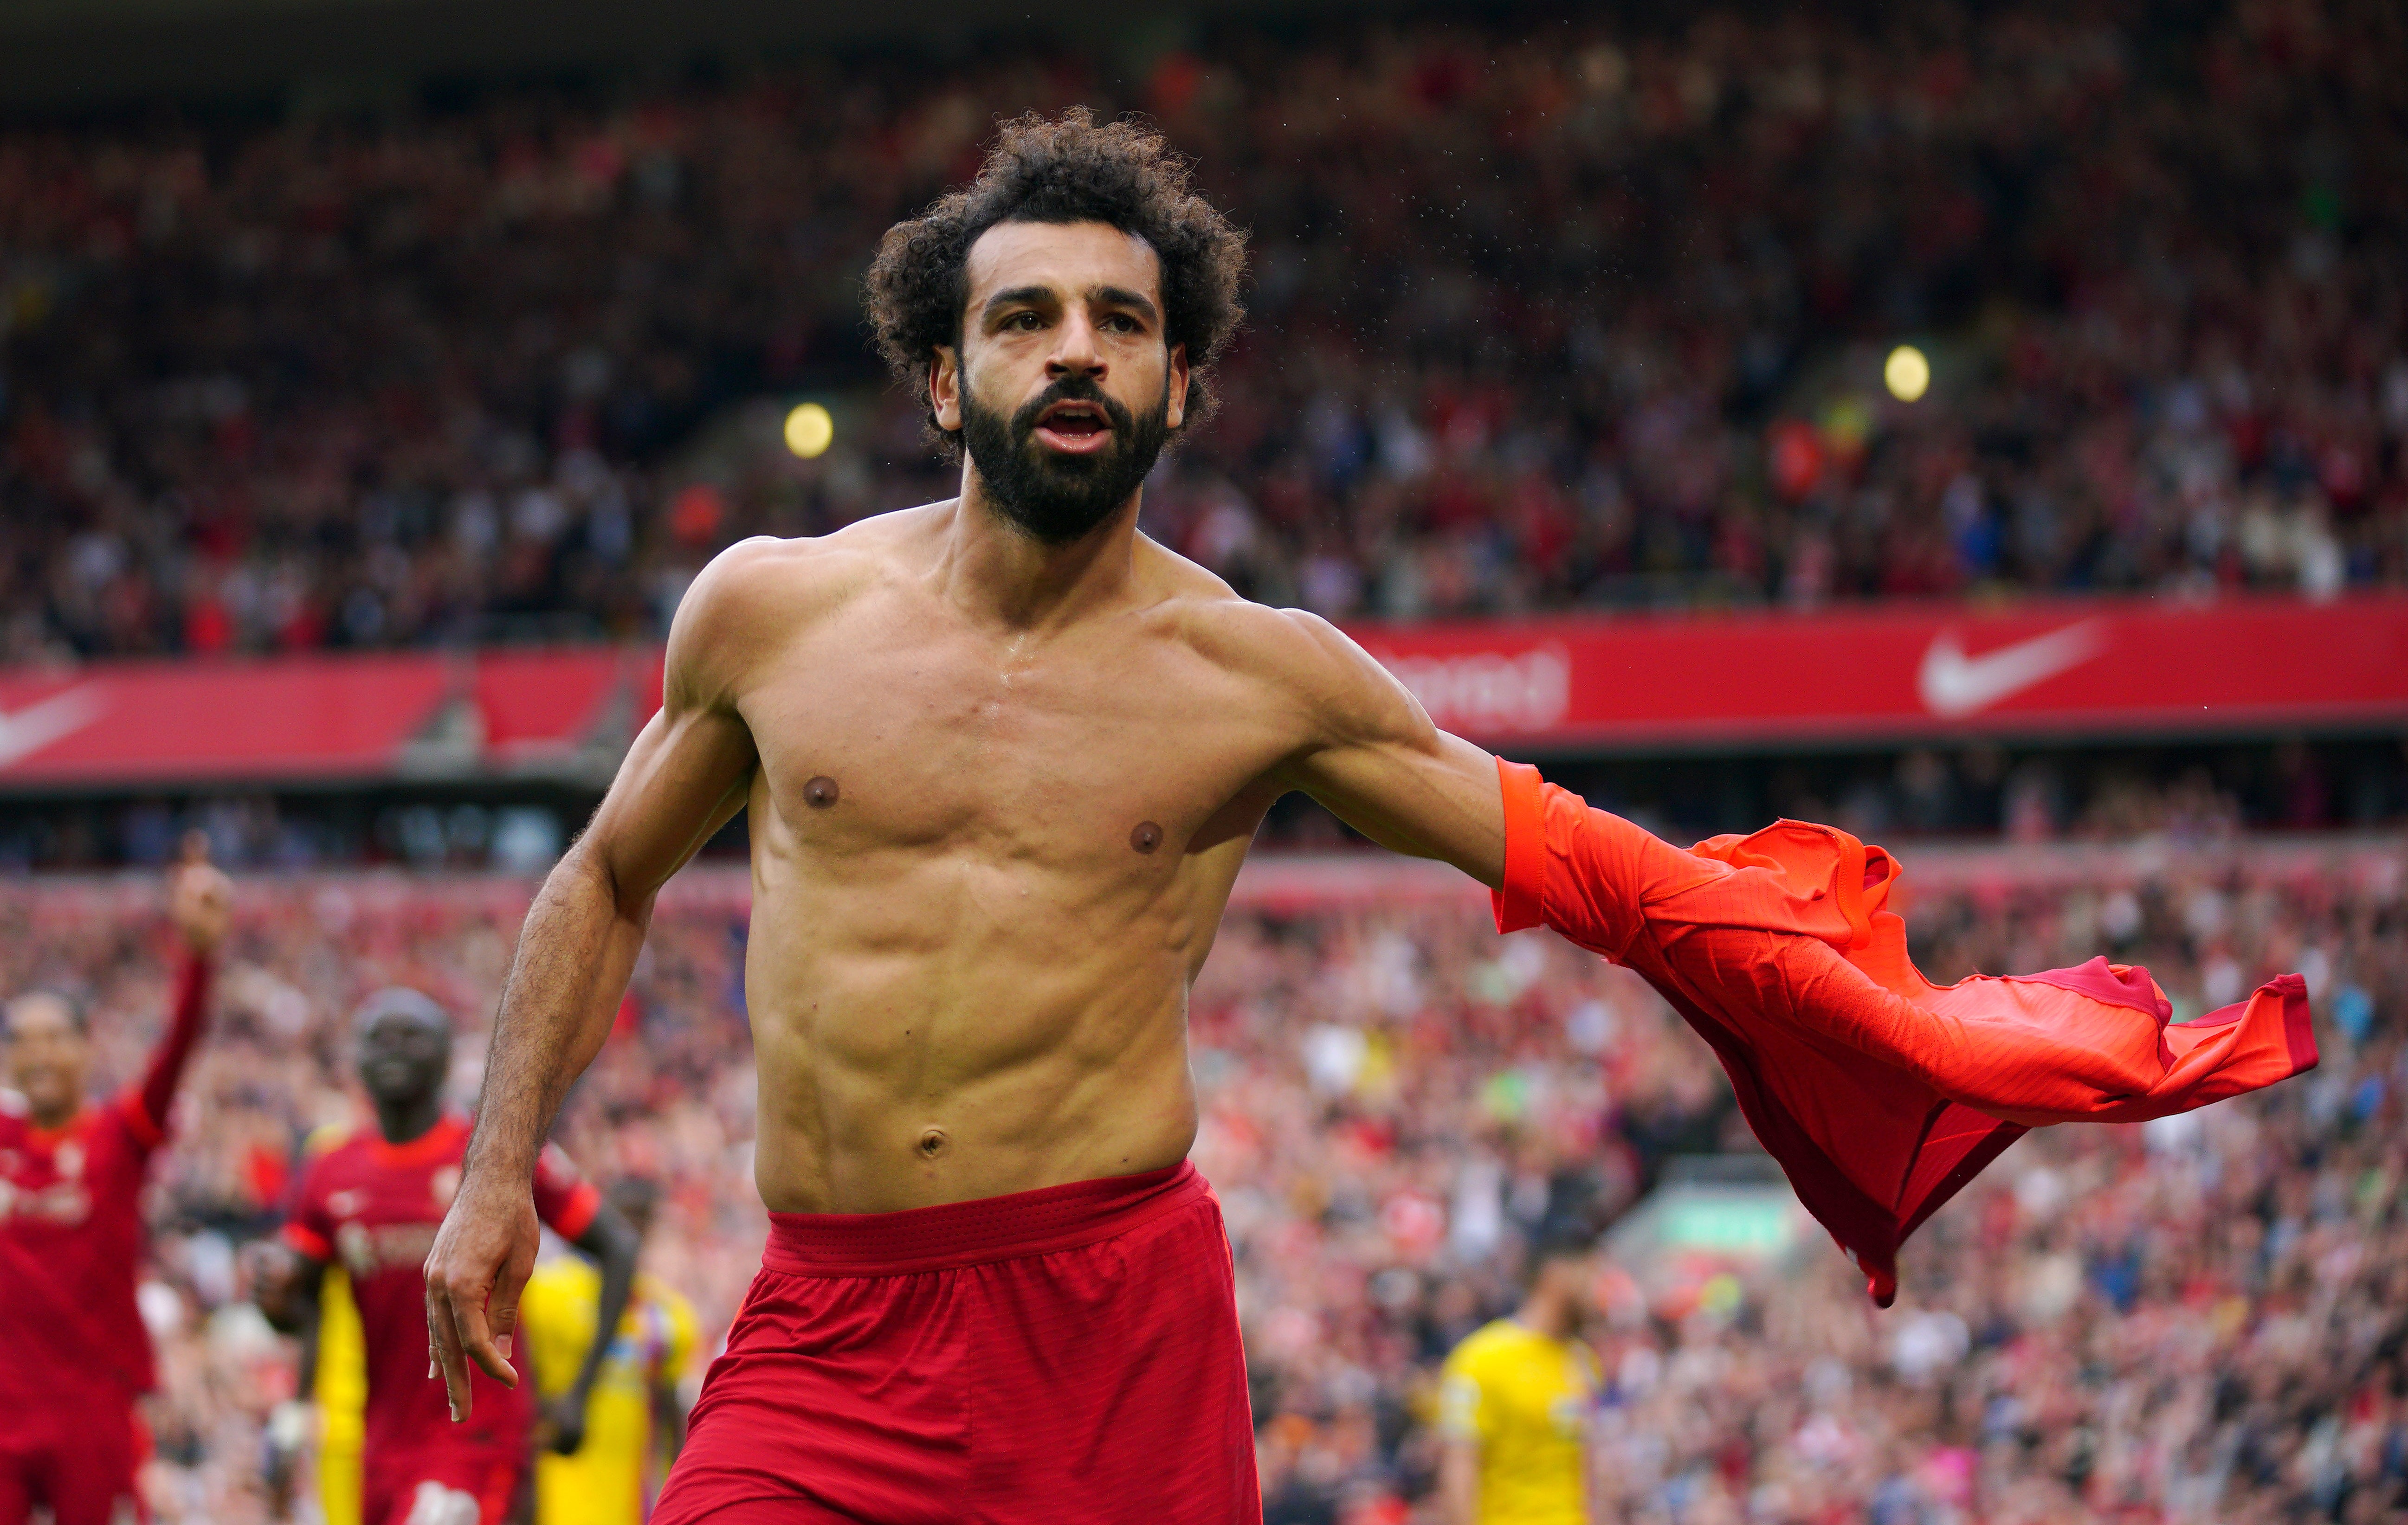 Mohamed Salah added another brilliant goal to his long list for Liverpool